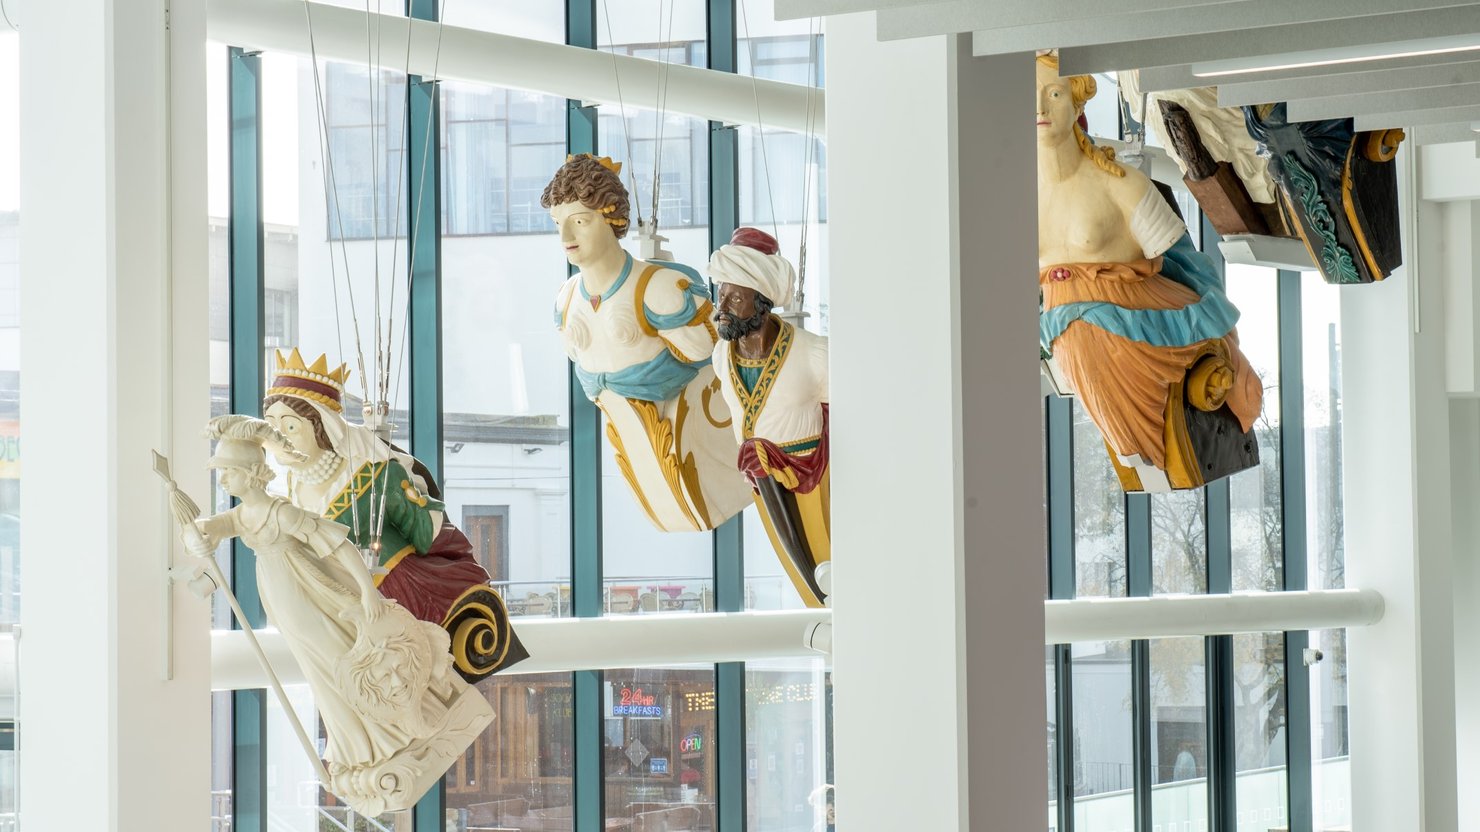 Photograph of ship's figureheads suspended from a ceiling